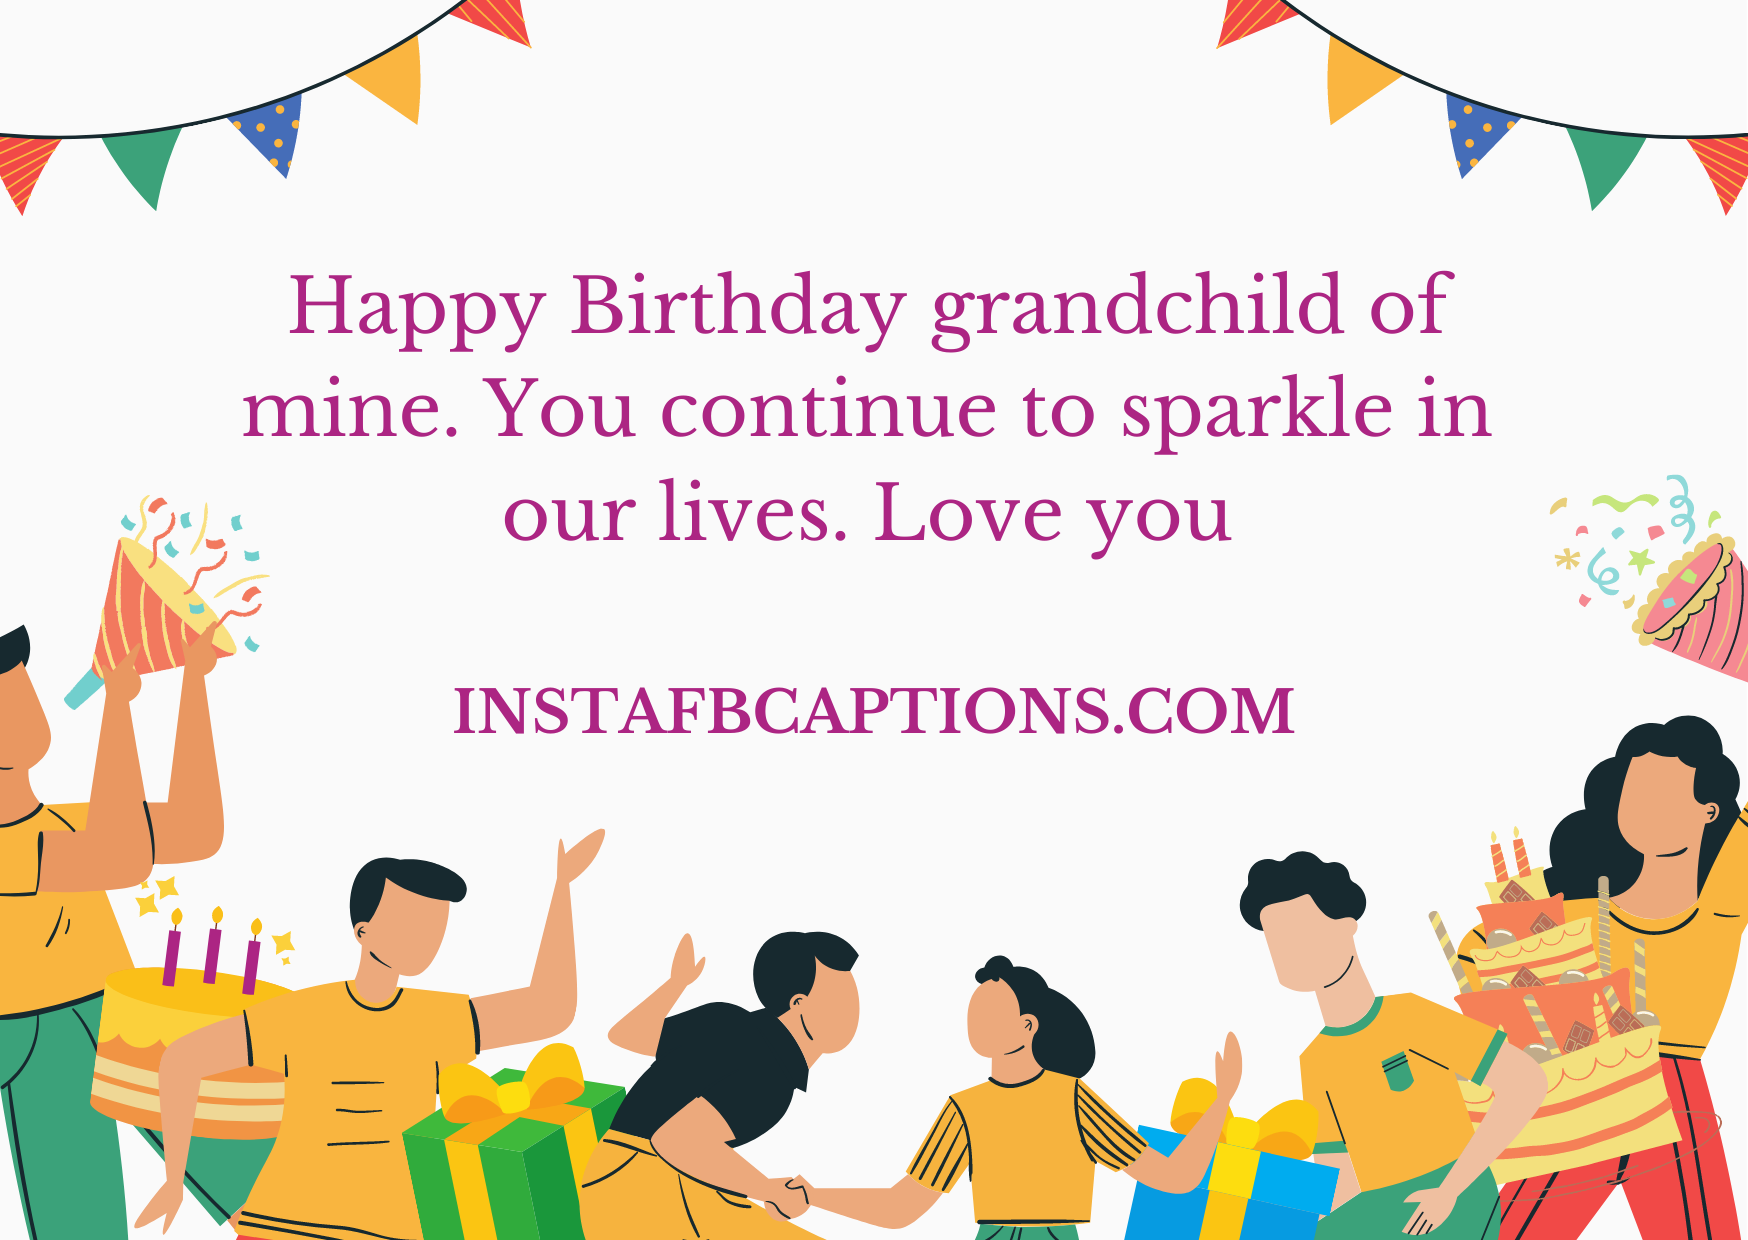 Lovely 5th Birthday Captions For Grandchild  - Lovely 5th Birthday Captions for Grandchild - 5th Birthday Captions for Son/Daughter in 2022